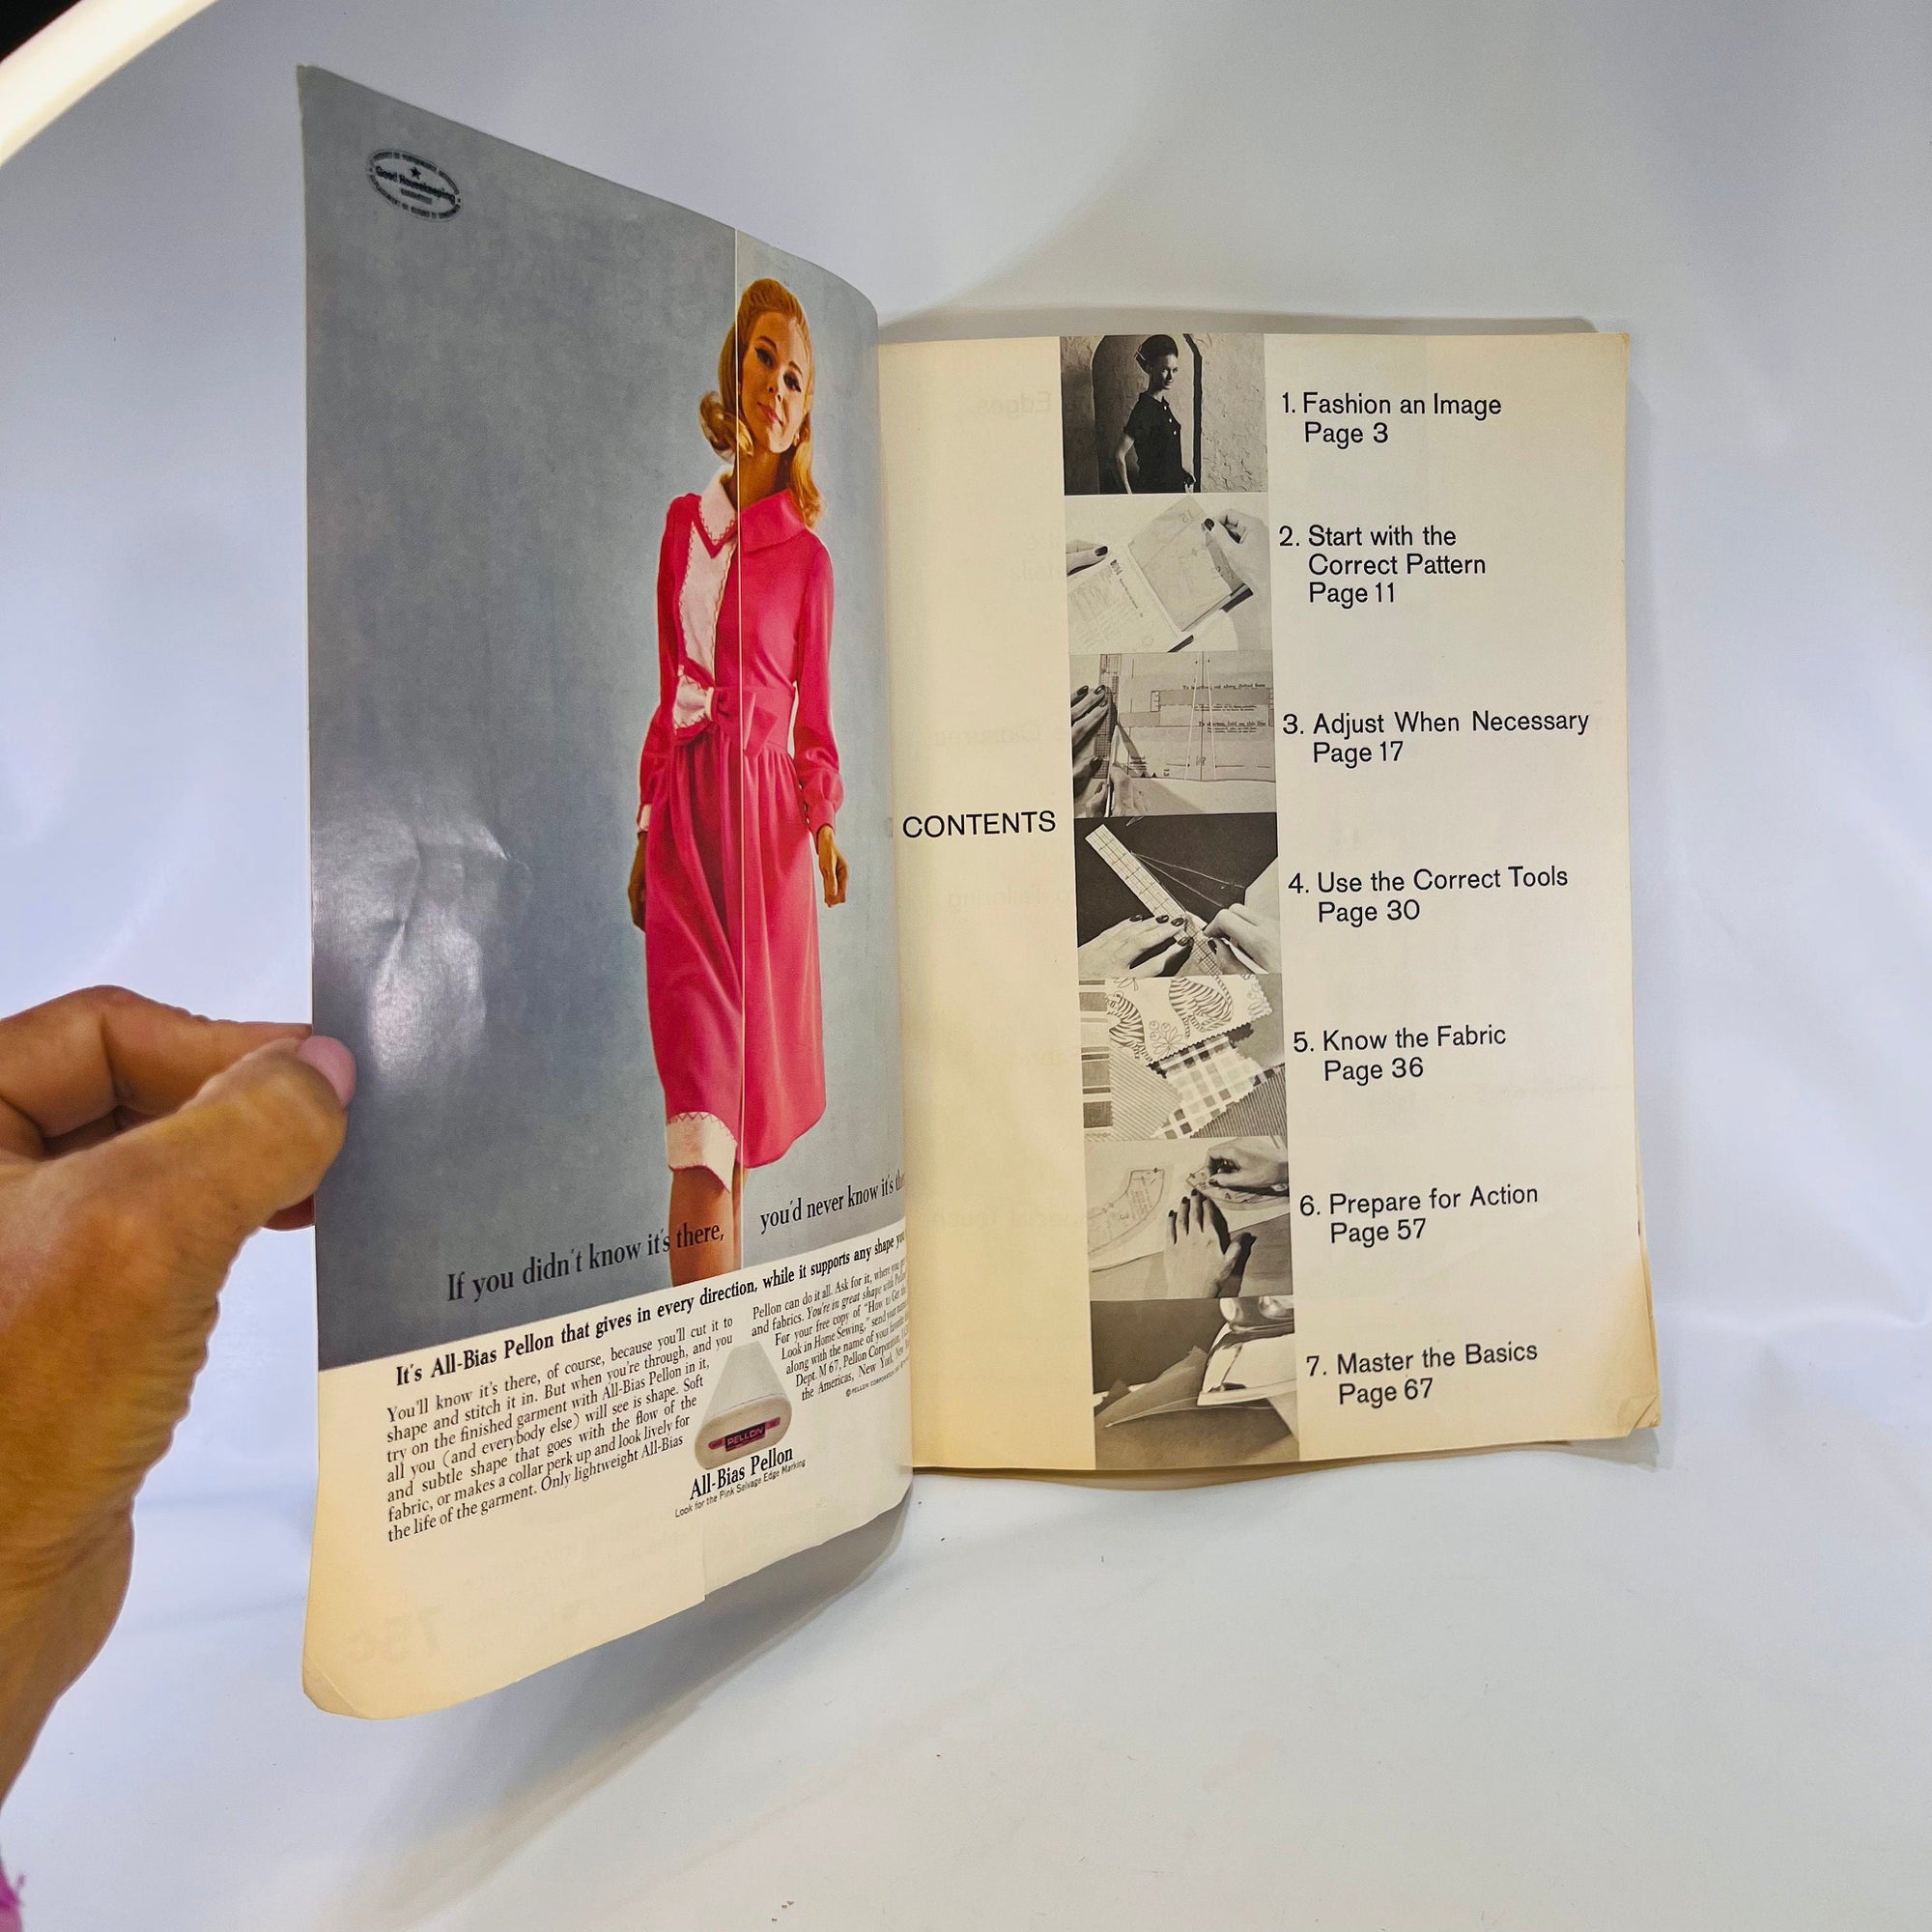 McCall's Step-By-Step Sewing Book 1967 The McCall's Corporation Vintage Sewing Guide with Patterns Sizing  Advertising & Photo Sewing